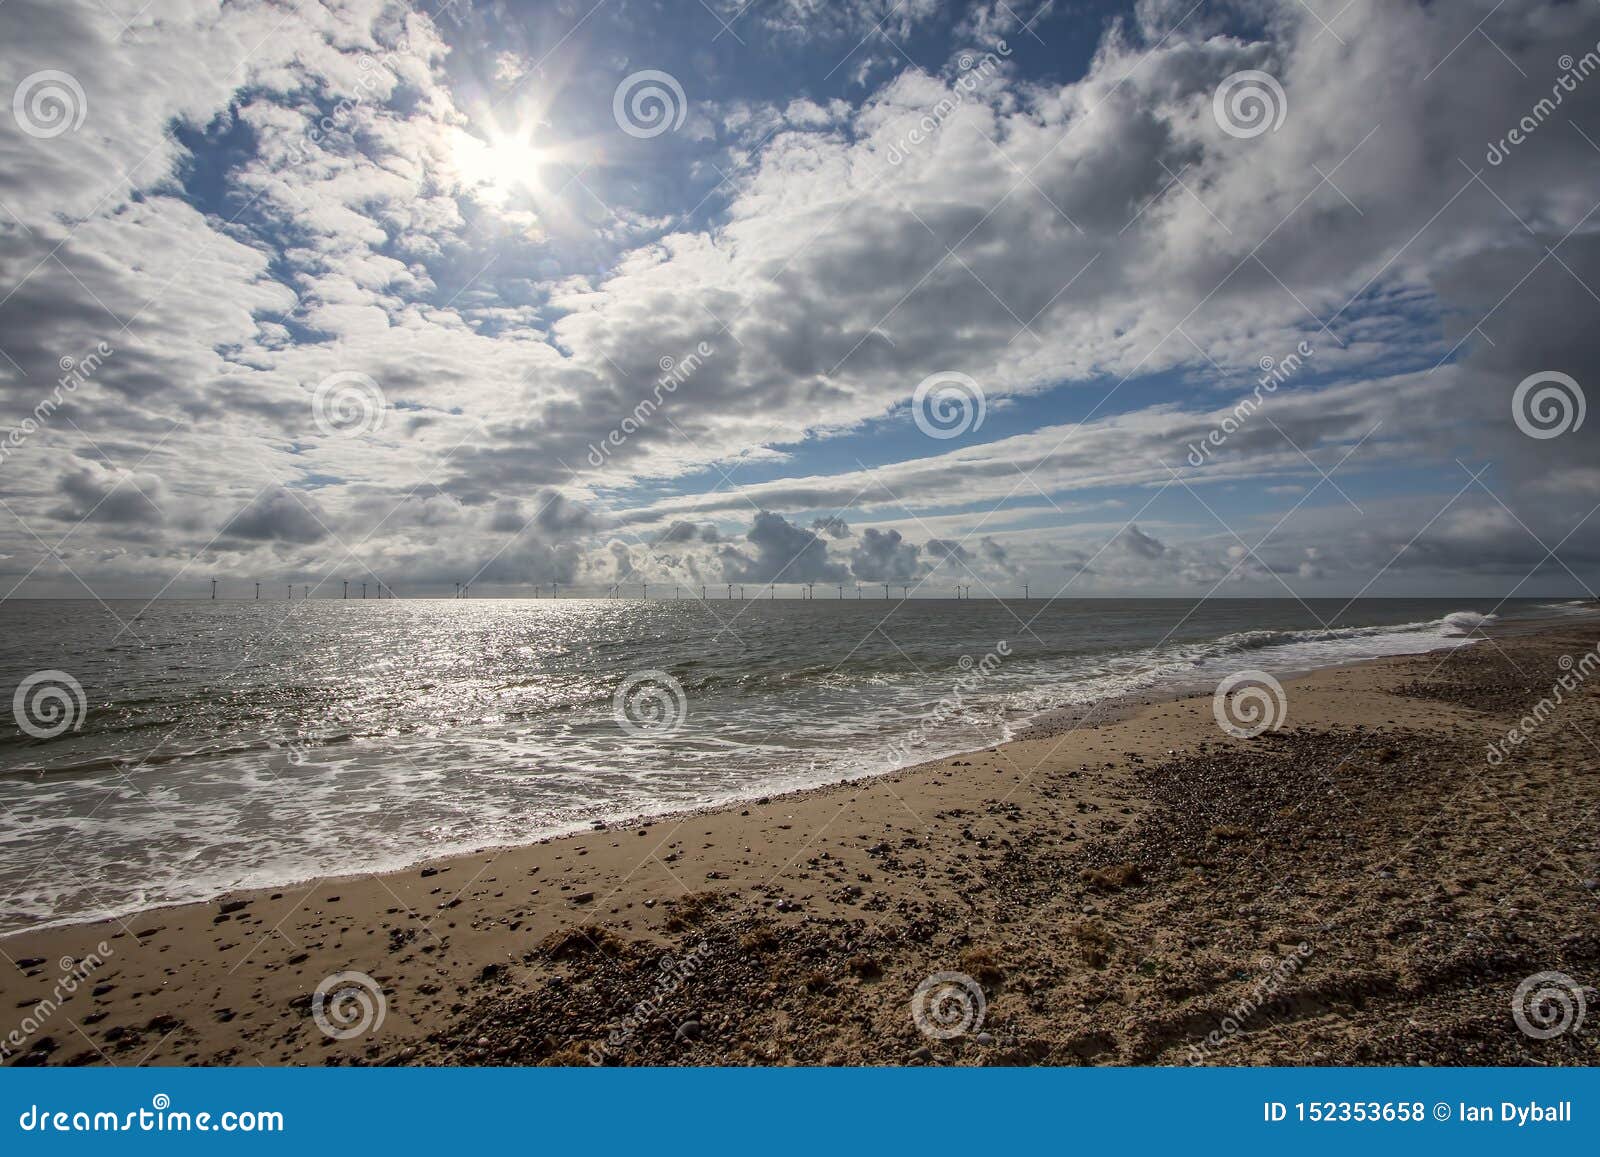 Coast. Dramatic weather sky. Offshore wind farm turbines. Coast. Dramatic weather sky landscape seascape. Offshore wind turbine farm. English coastal scene with pebbled beach and beautiful cloudy sky over sea waves with windmill turbines on the horizon